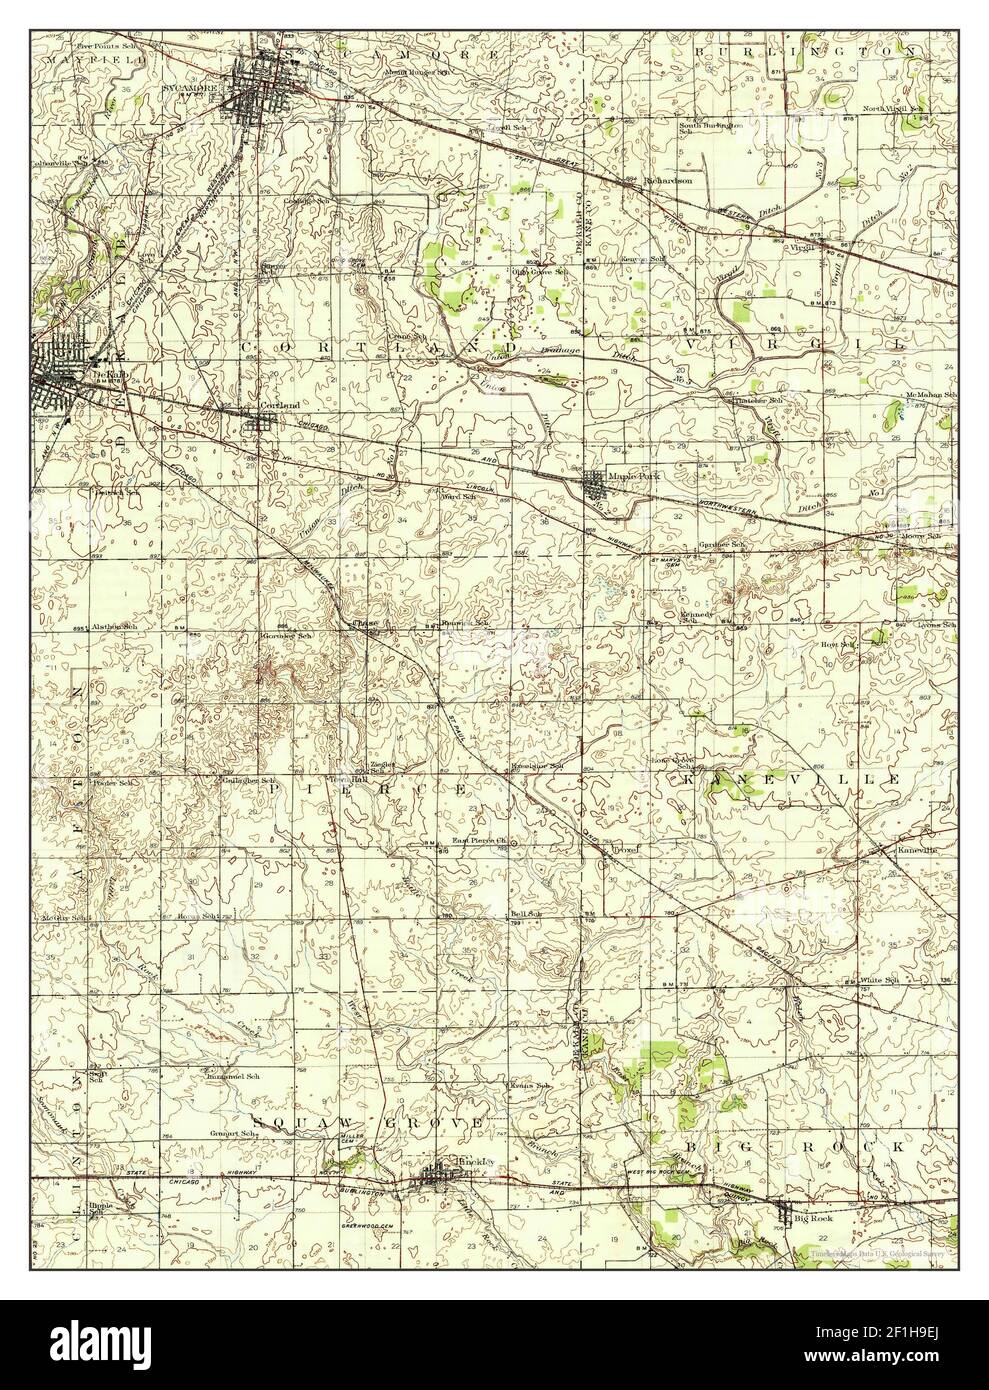 Sycamore illinois map Cut Out Stock Images & Pictures - Alamy